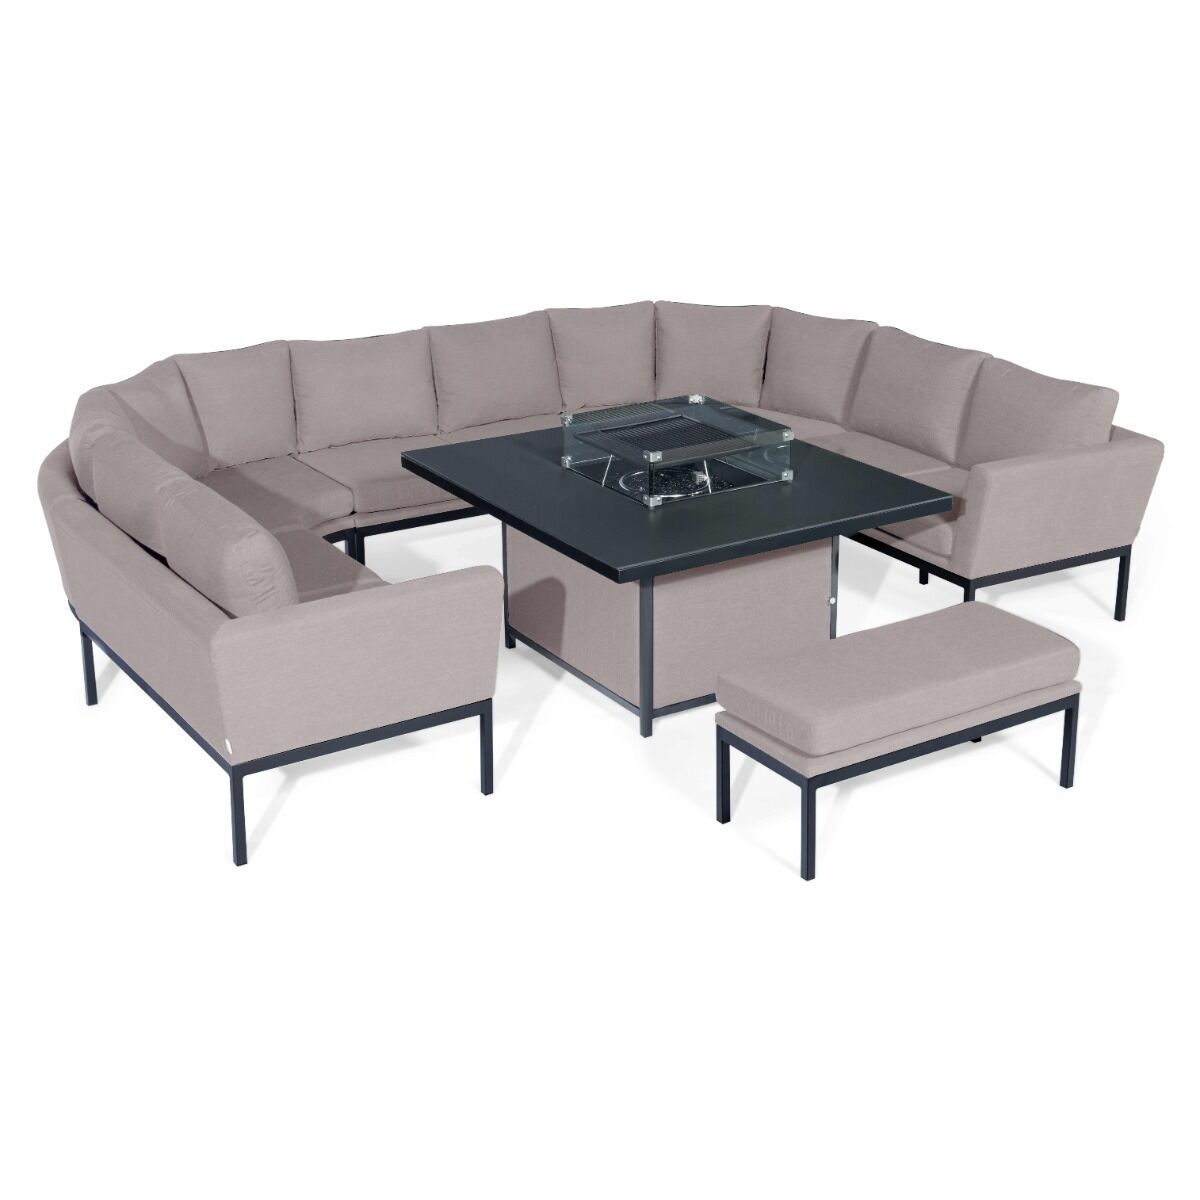 Maze - Outdoor Fabric Pulse U Shape Corner Dining Set with Firepit Table - Taupe product image